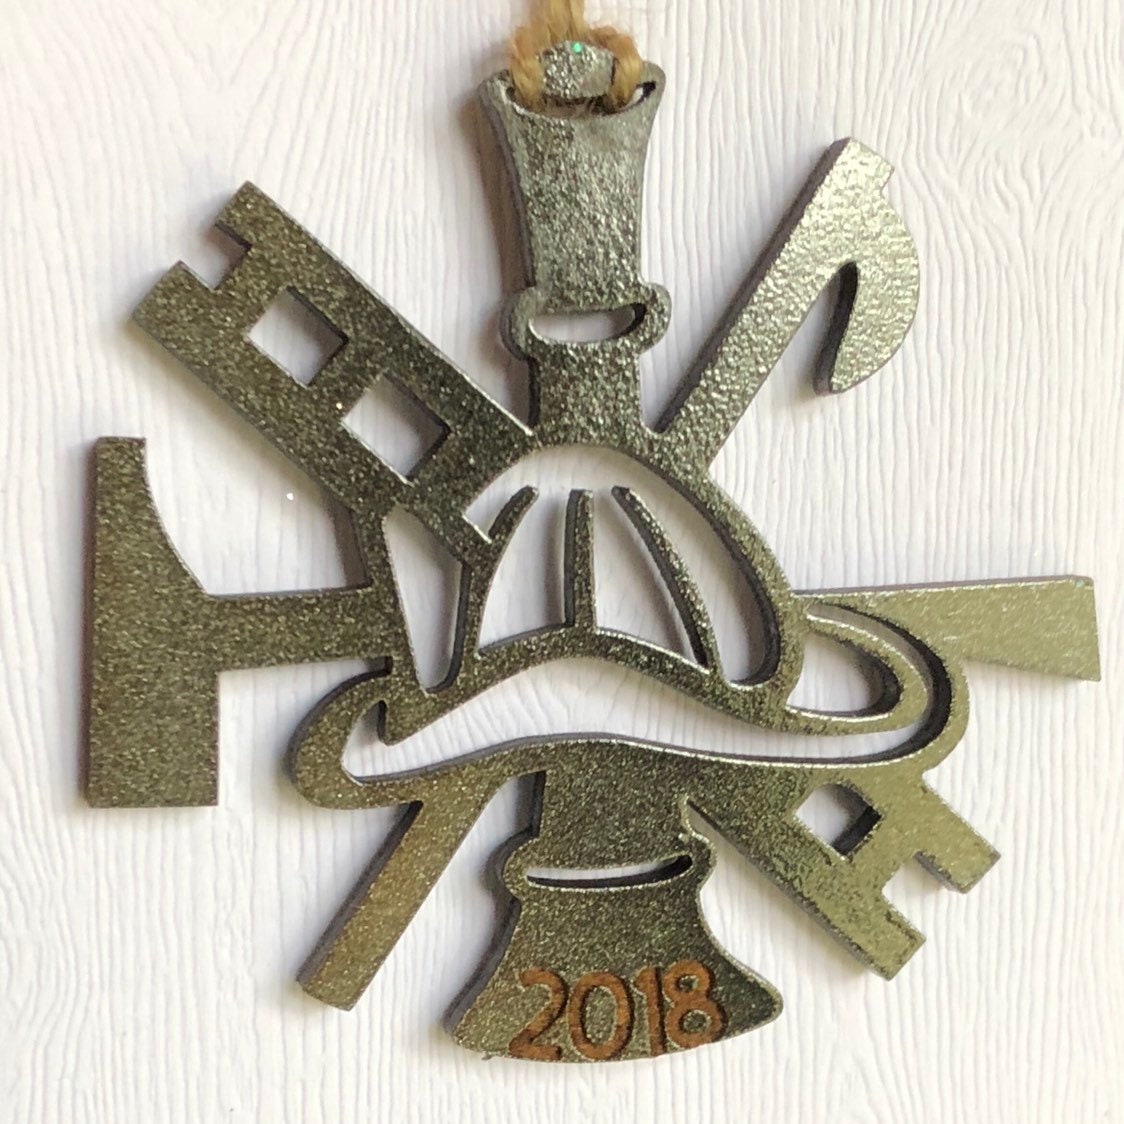 Firefighter Christmas Ornament Etched with Year in Metallic